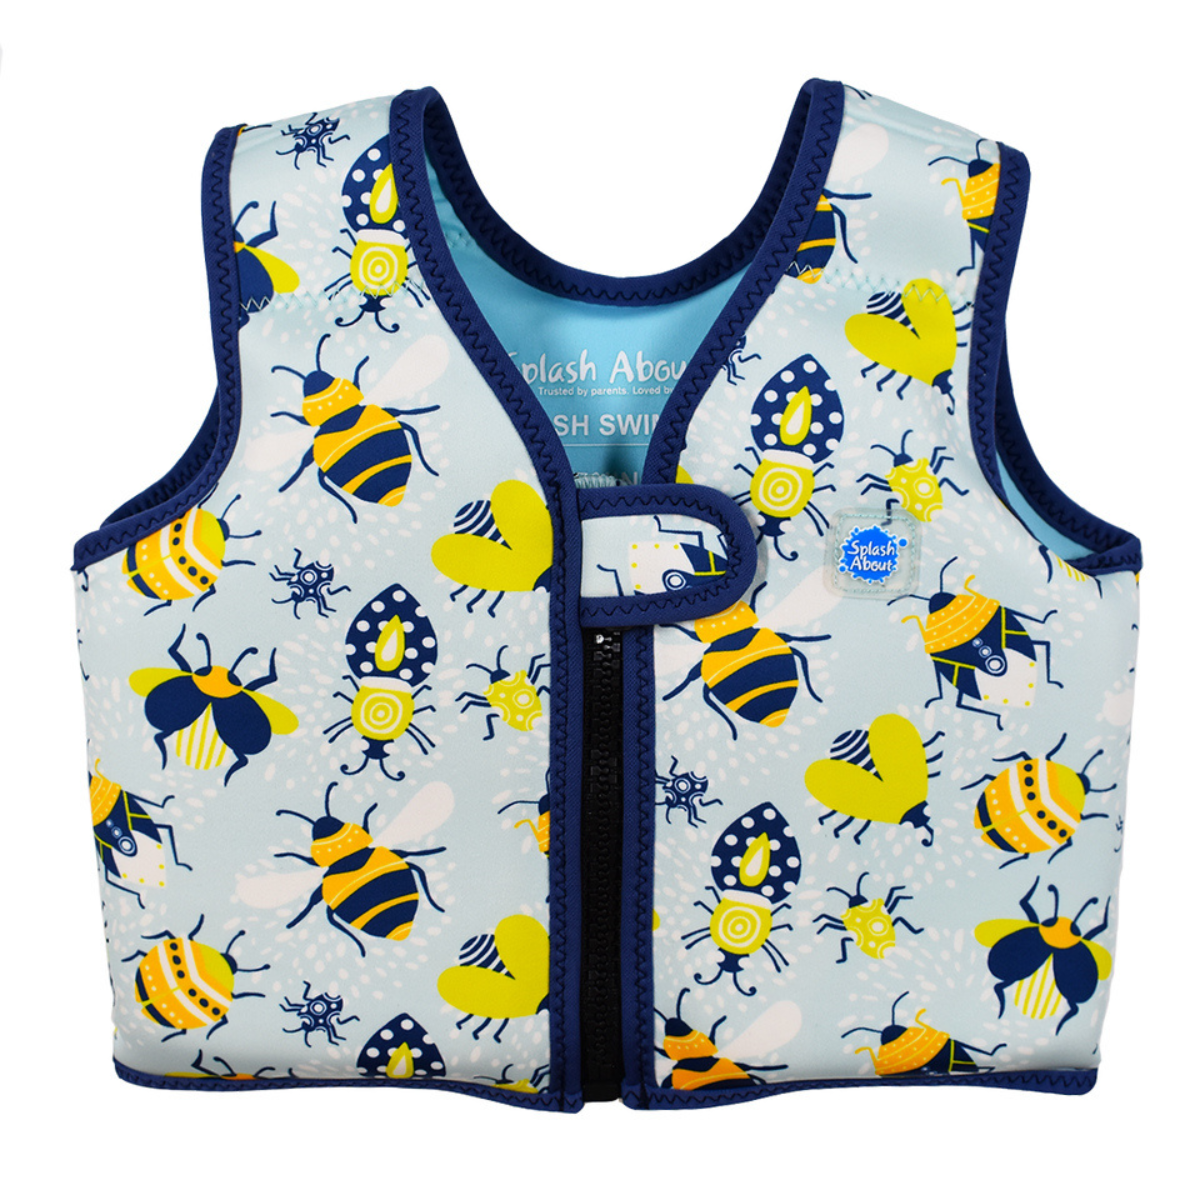 Neoprene swim vest for toddlers with non-removable floats in light blue, navy blue trims and insects print. Front.